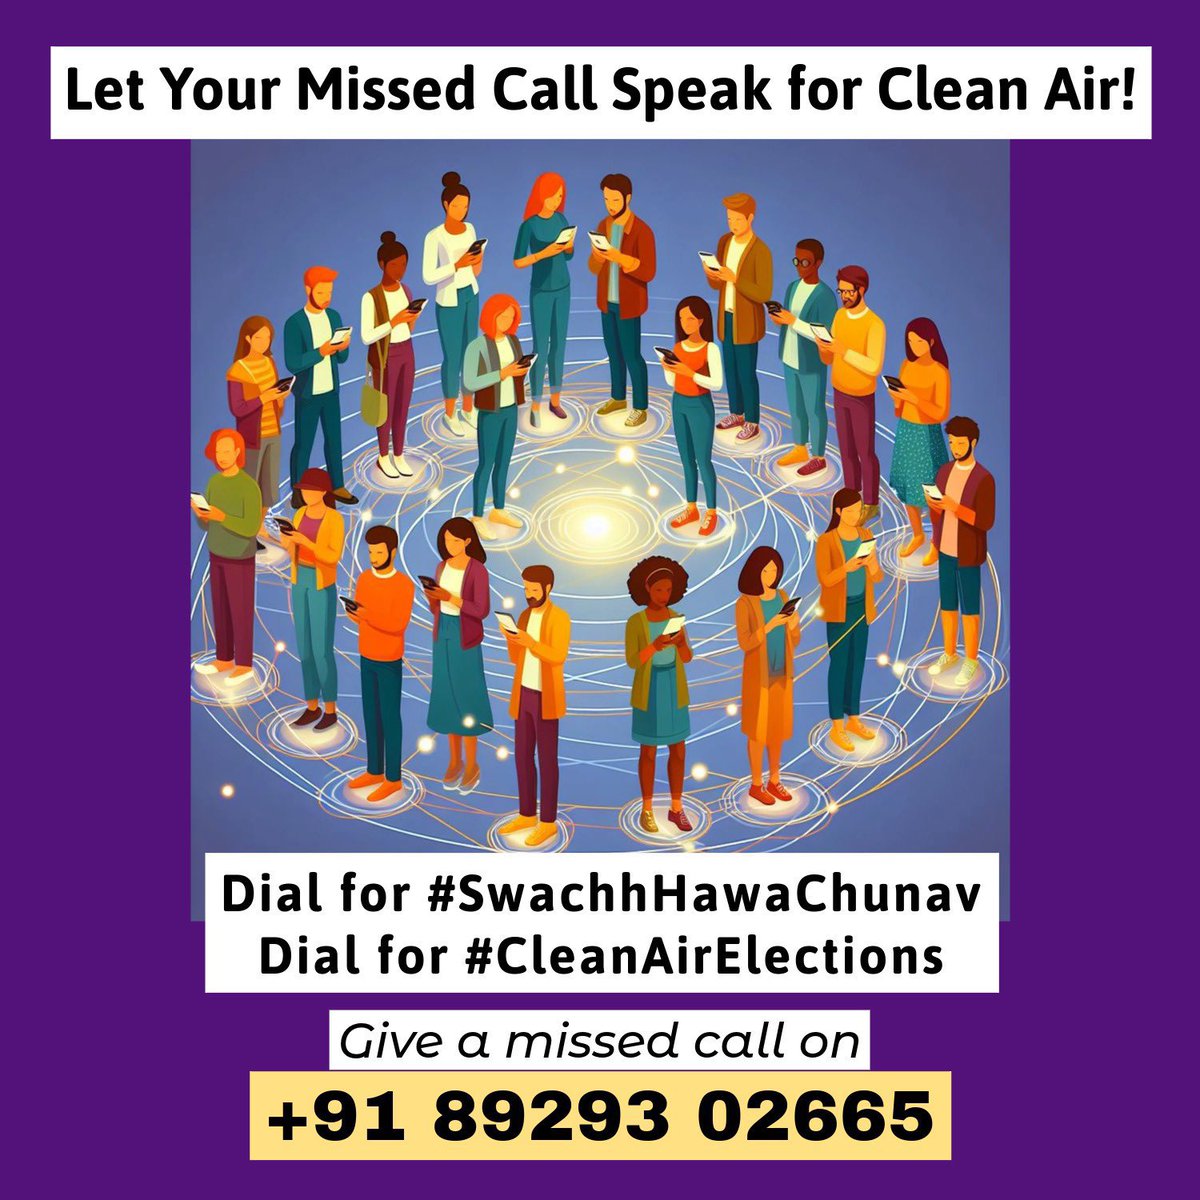 Do we want to face round- the-year air pollution? Let political candidates know #ourhealthmatters. 

We demand clean air. Just click and call: +918929302665

#PrioritizePublicHealth
#SwachhHawaChunav